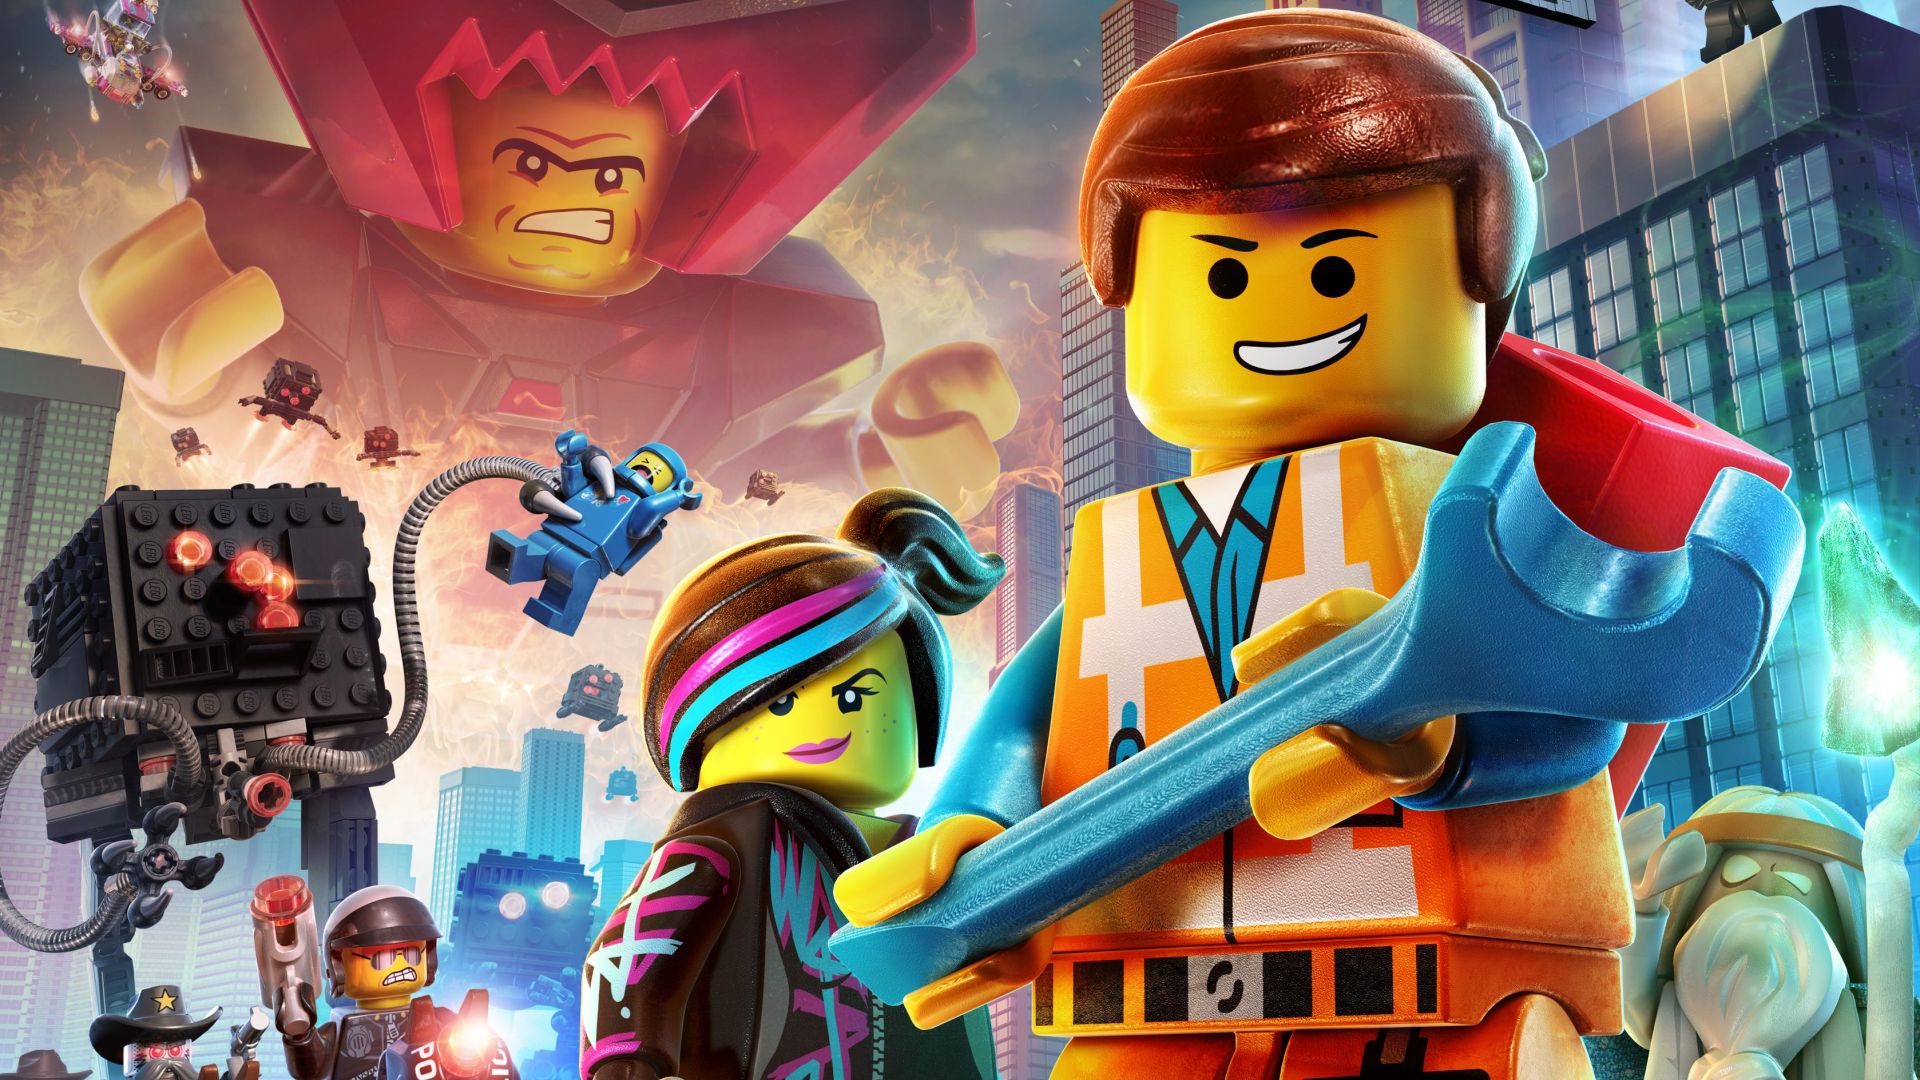 video game, the lego movie videogame, benny (the lego movie), business, cop, emmet (the lego movie), lego, lord, movie, president business, space, vitruvius (lego movie), wyldstyle (the lego movie)